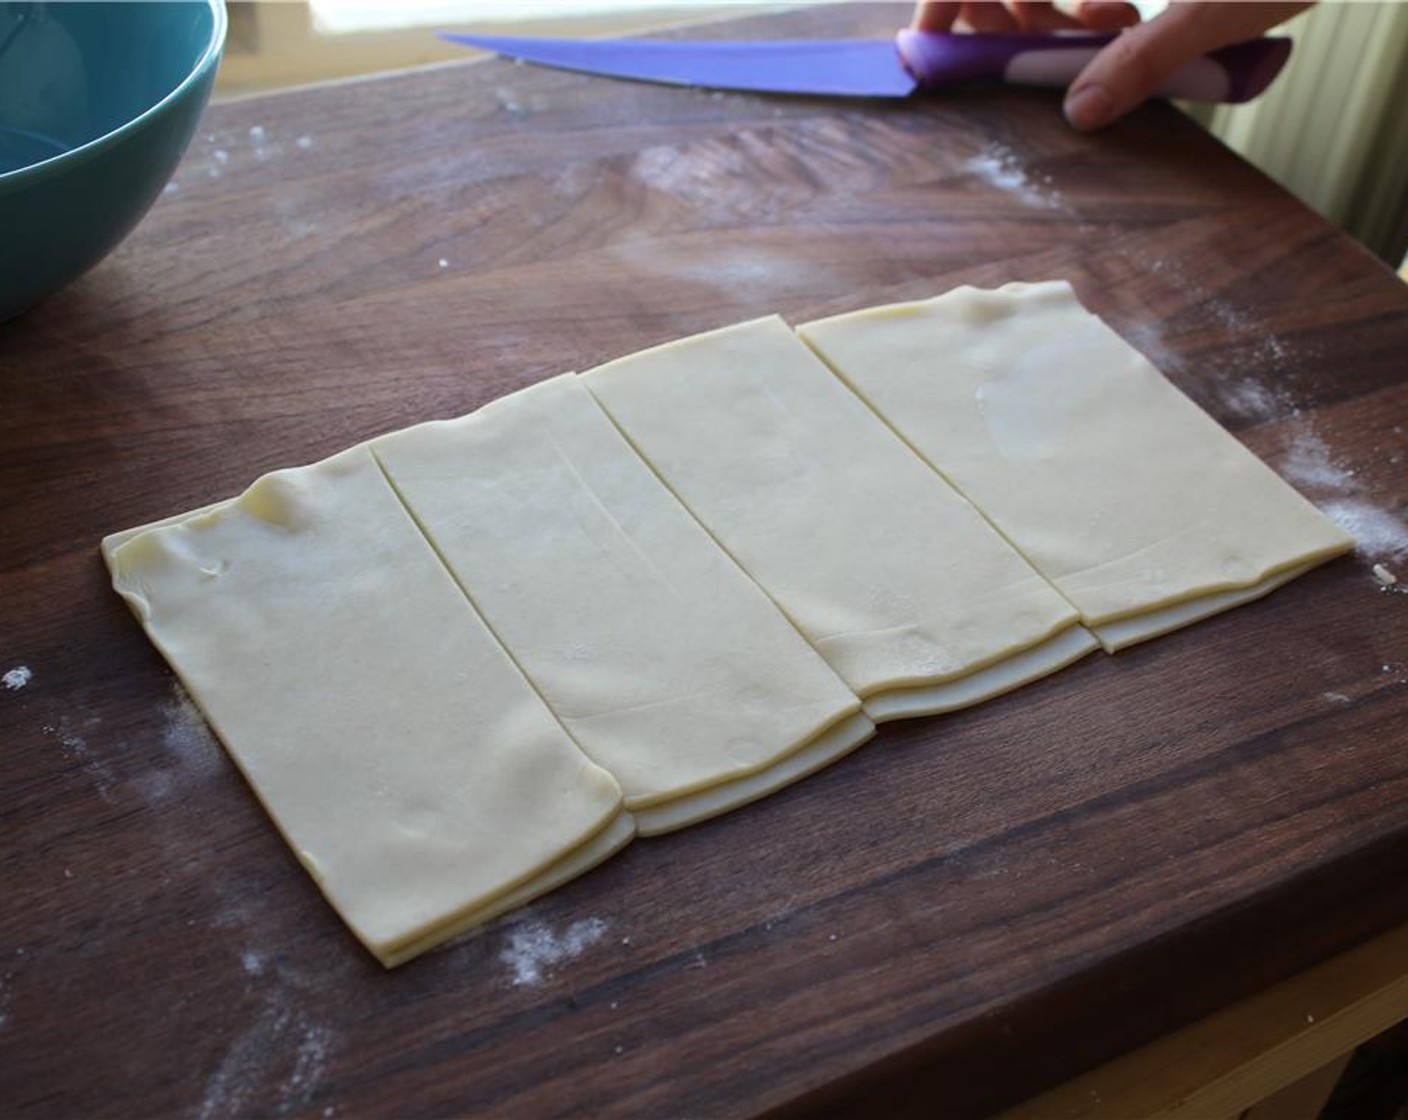 step 3 Cut the sheet of dough down the middle and stack the two halves. Then, slice the dough into four equal rectangles. They should be approximately 3x4 inches.